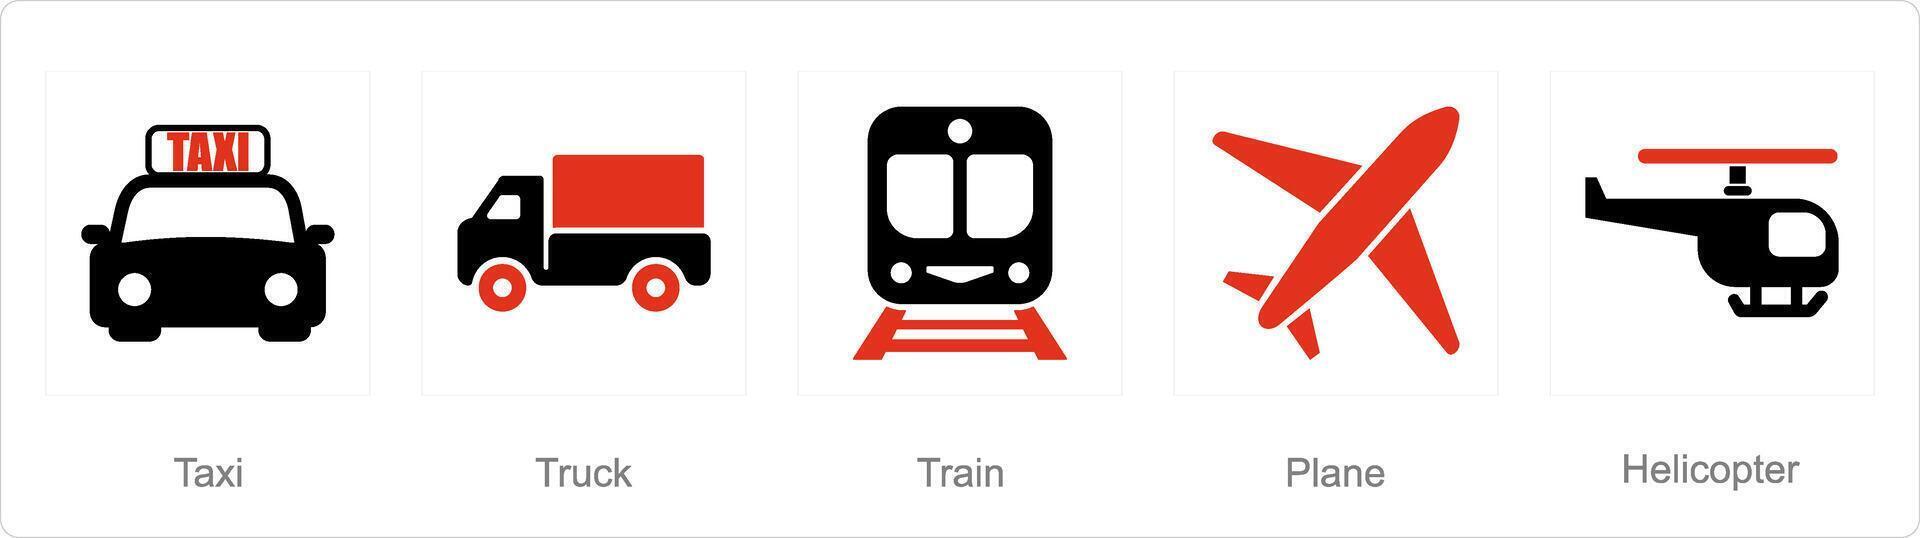 A set of 5 Mix icons as taxi, truck, train vector